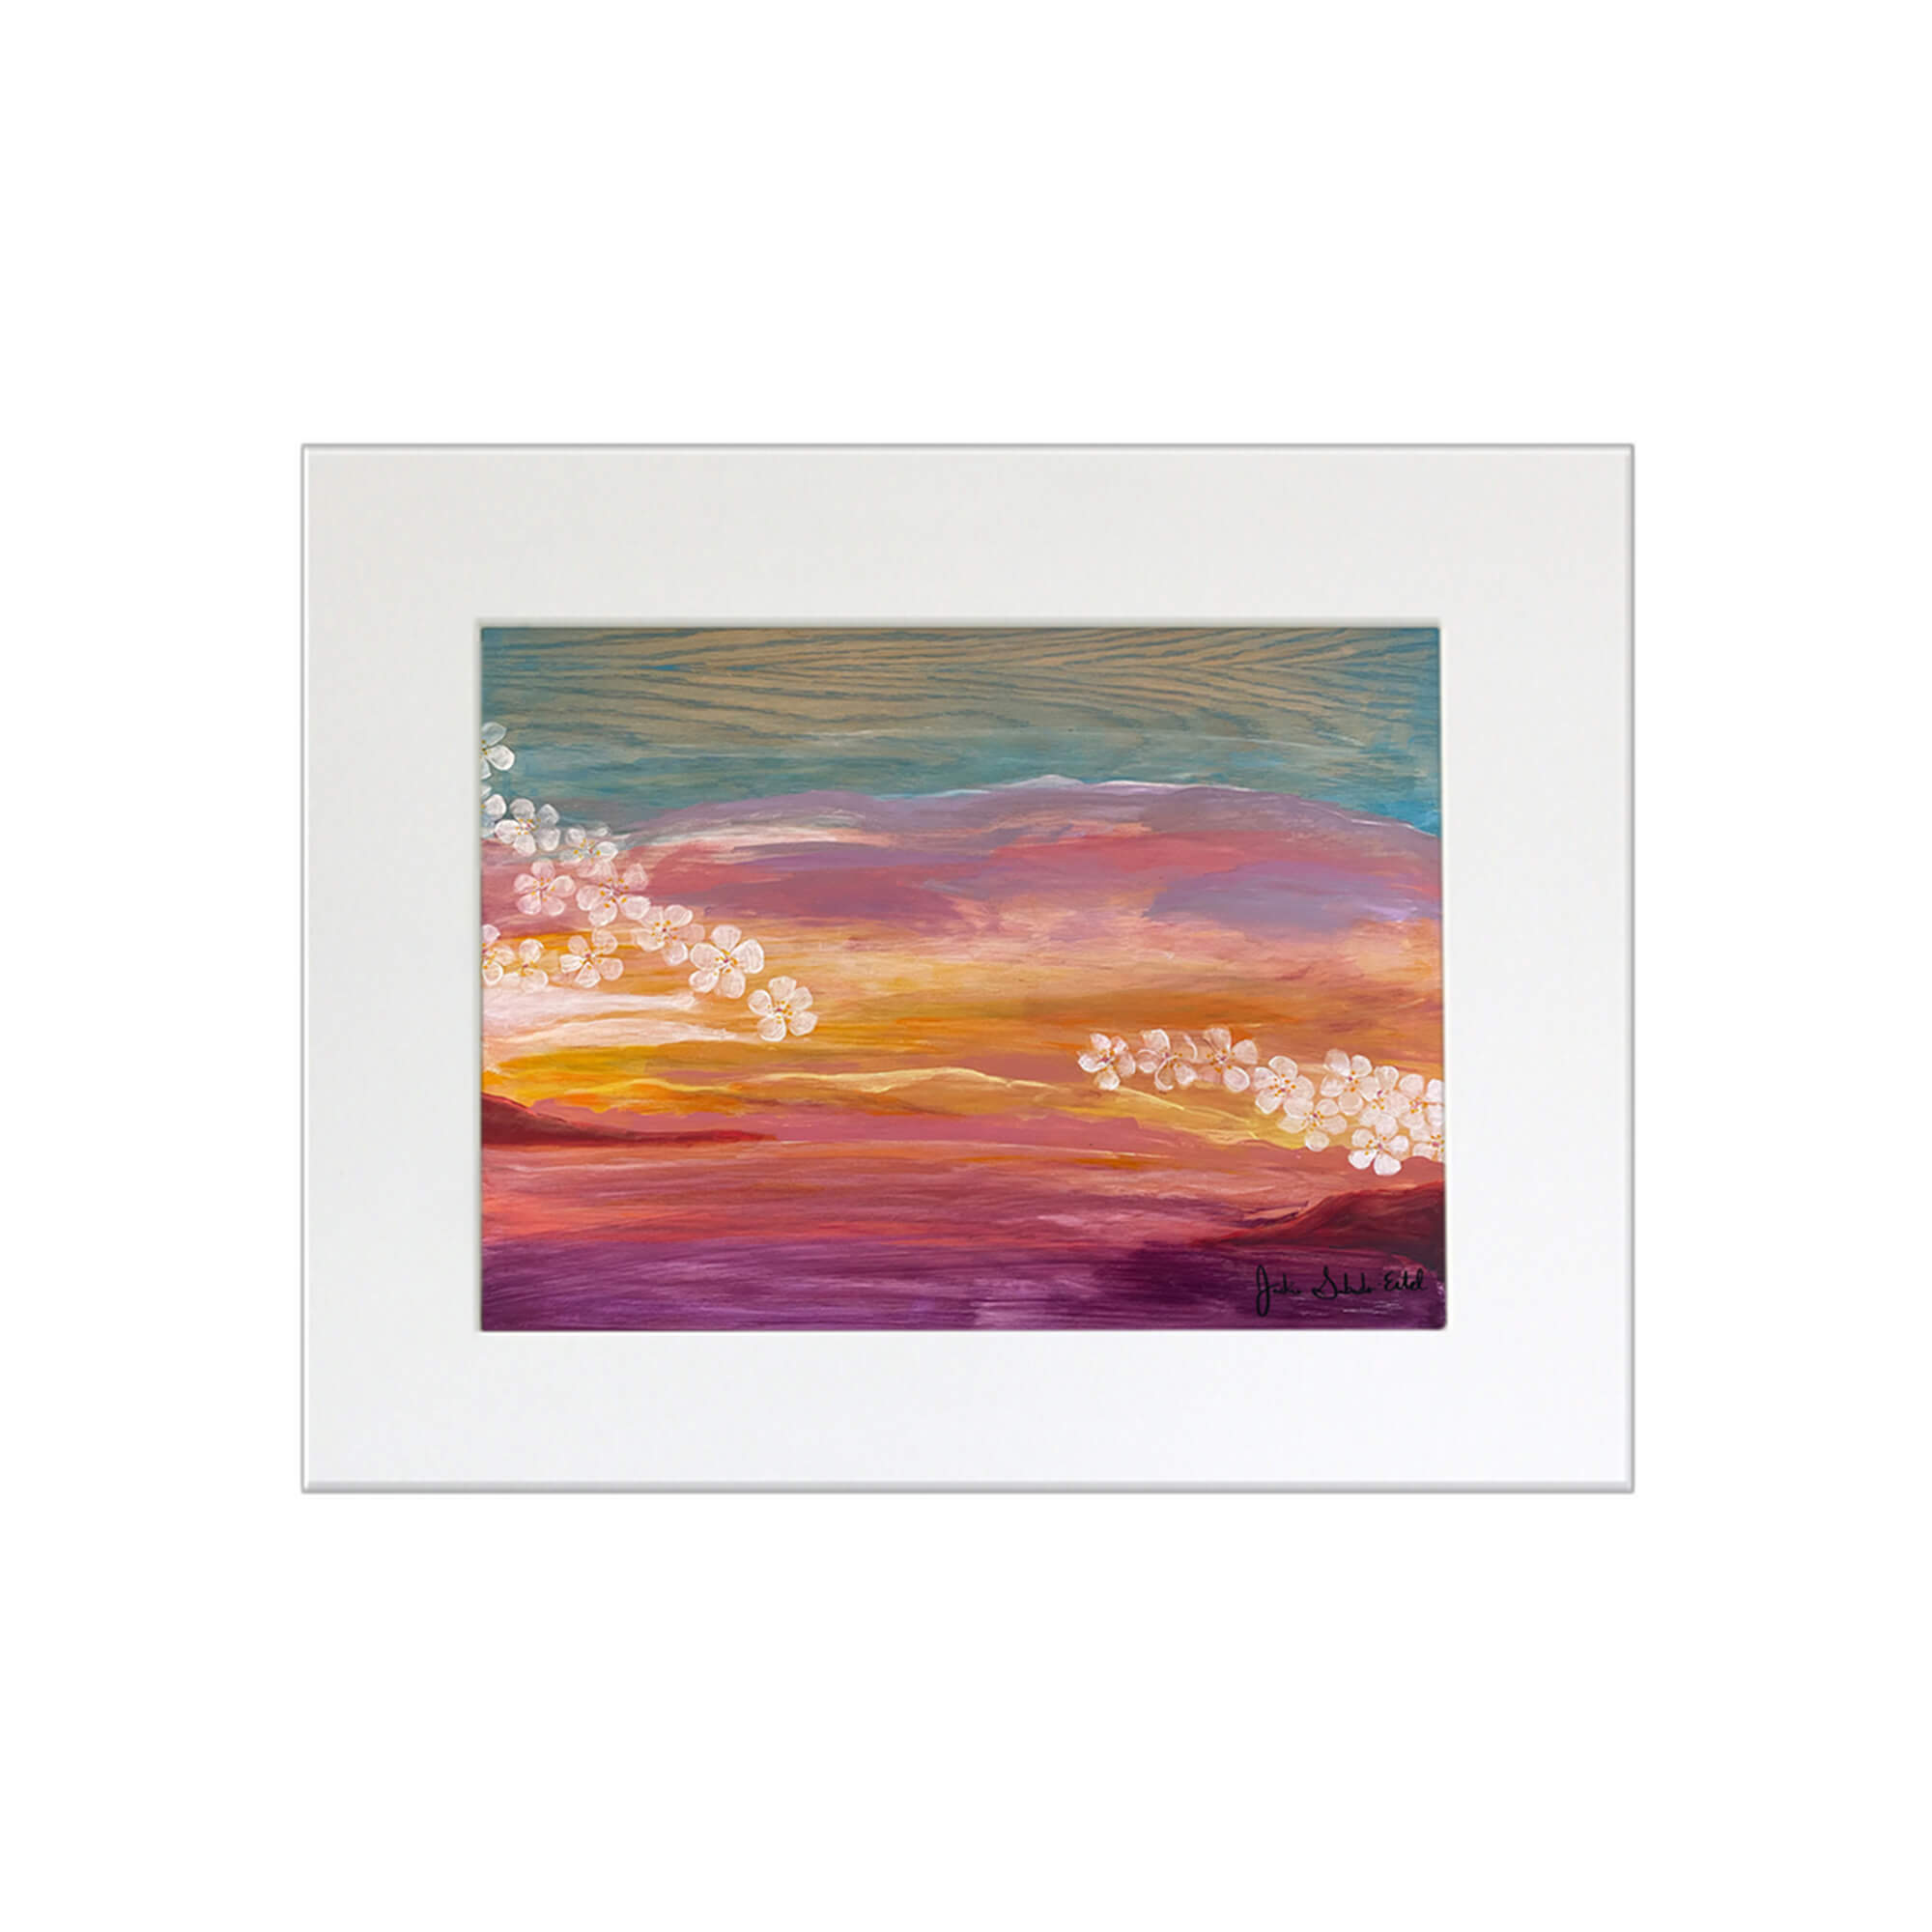 A matted art print featuring a vibrant colorful sunset and plumeria flowers by Hawaii artist Jackie Eitel